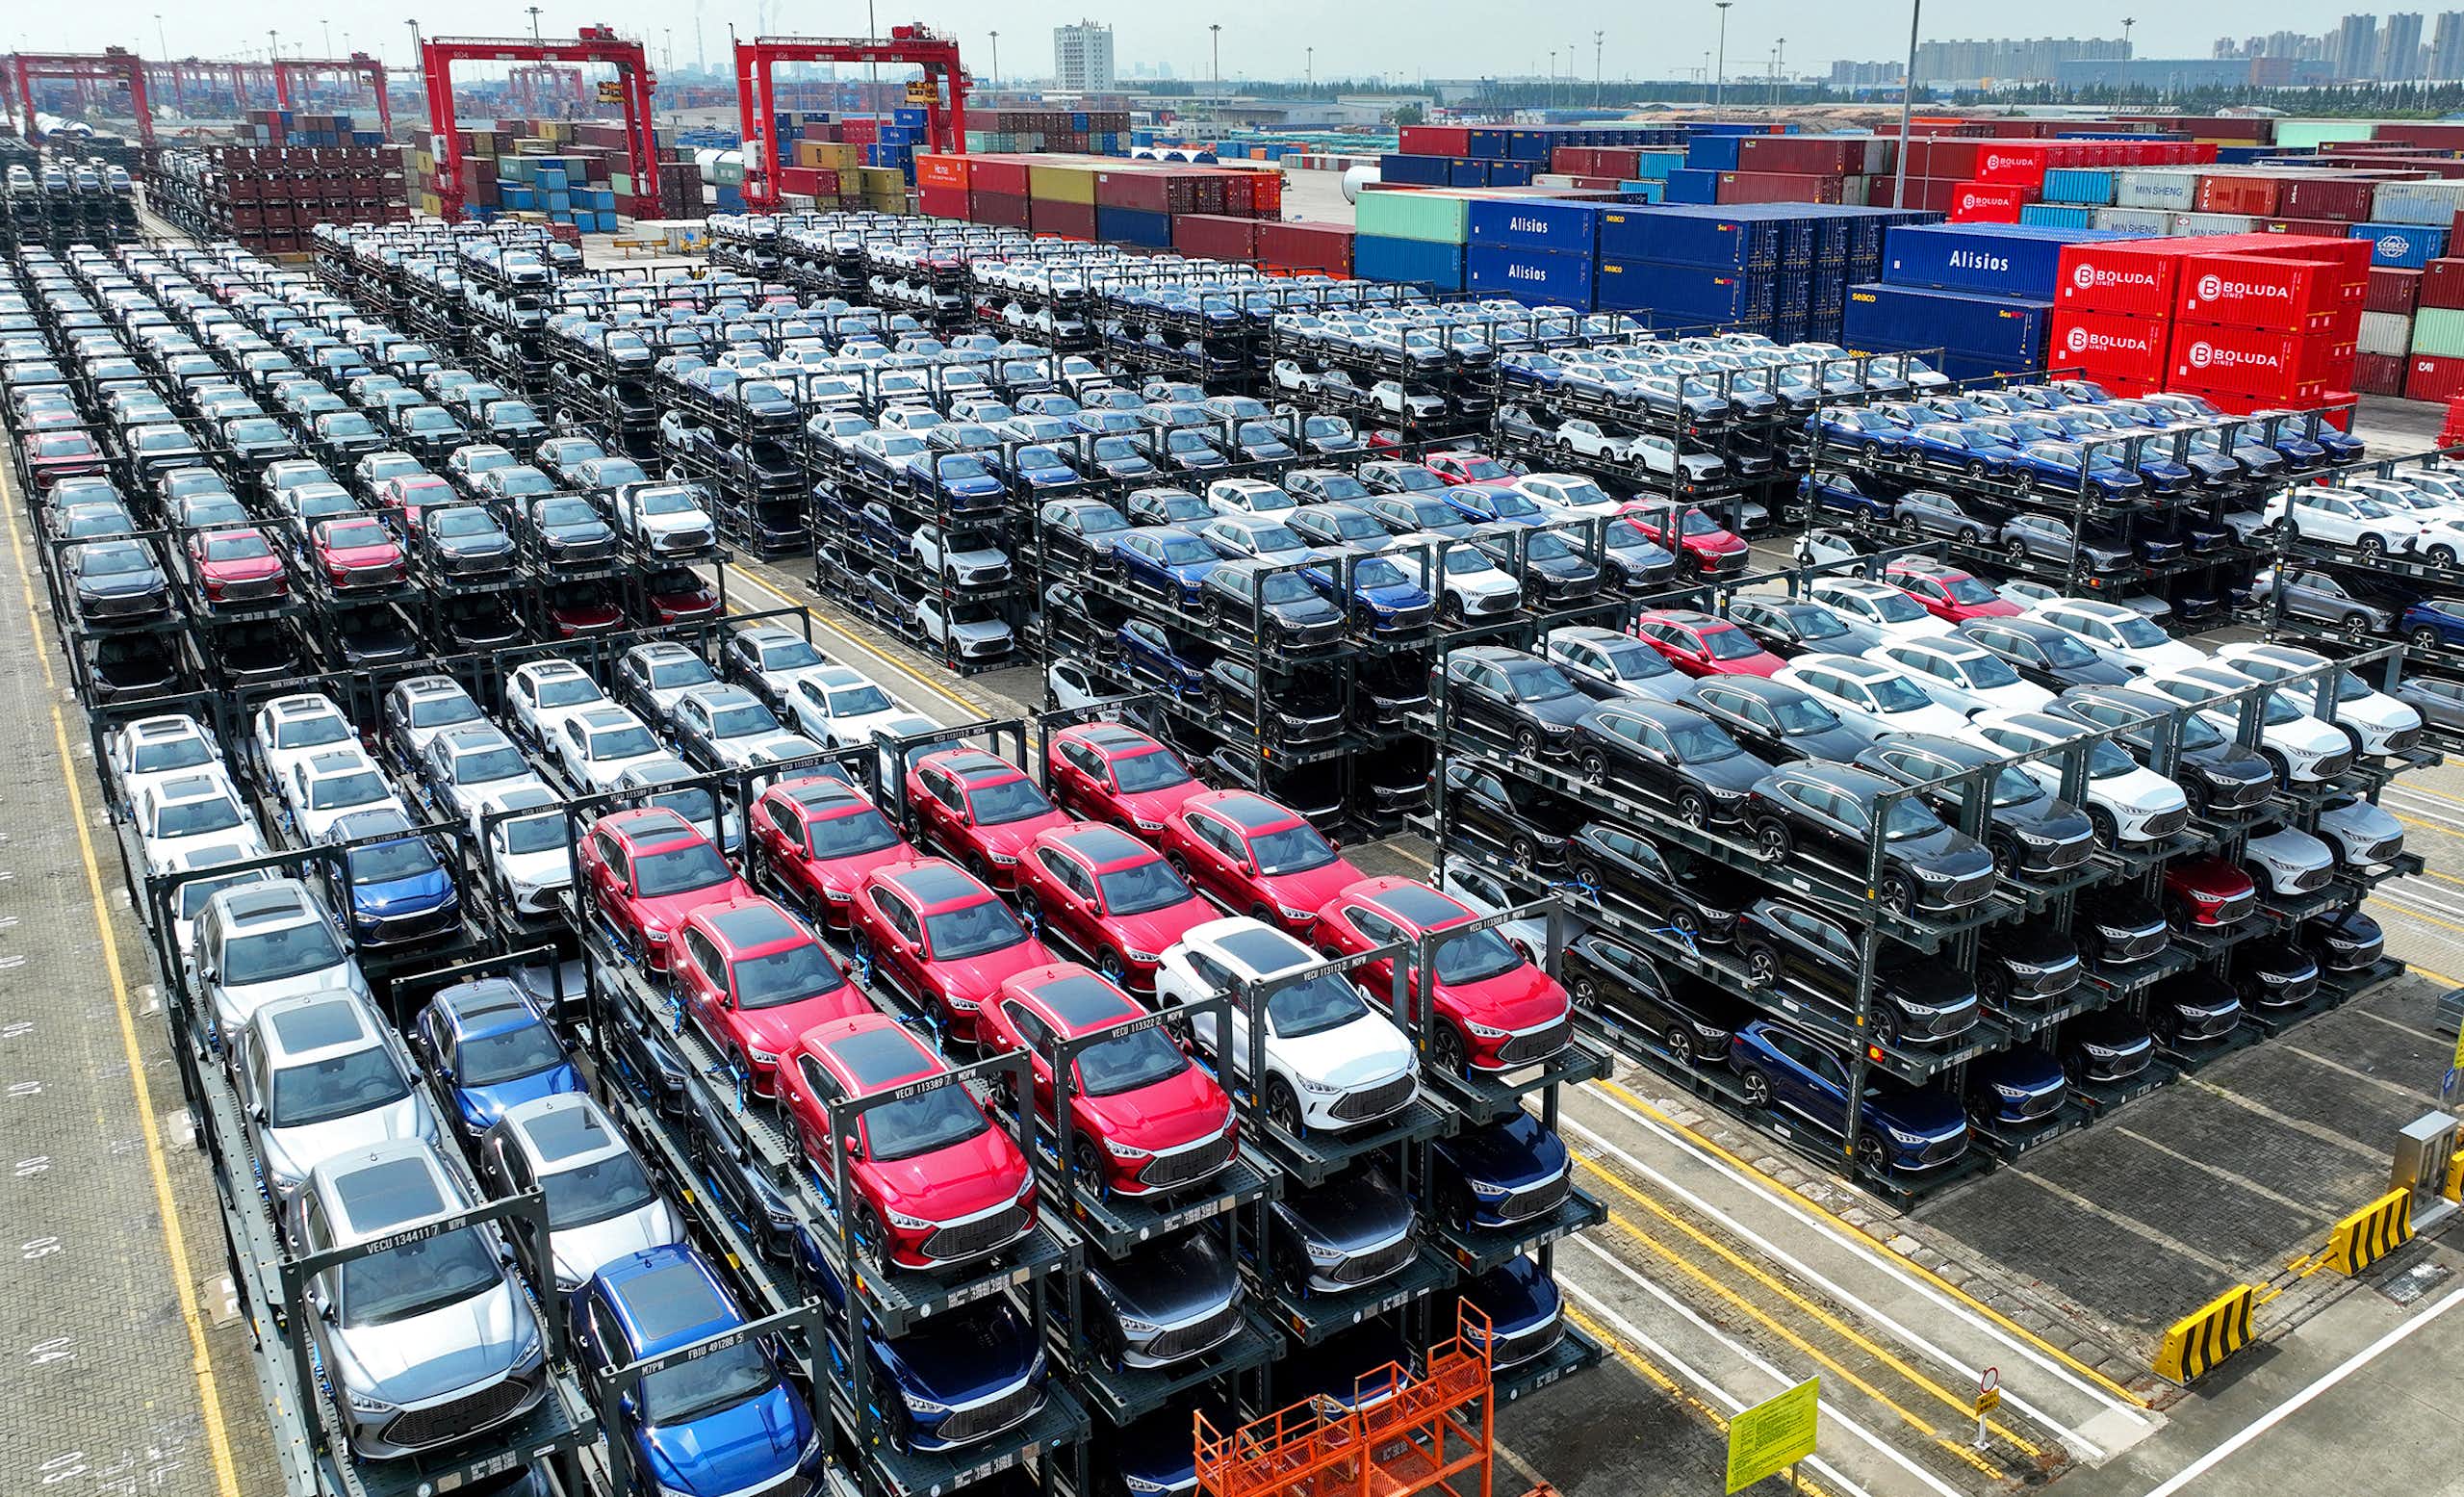 BYD vehicles are stacked three high for loading on a ship.